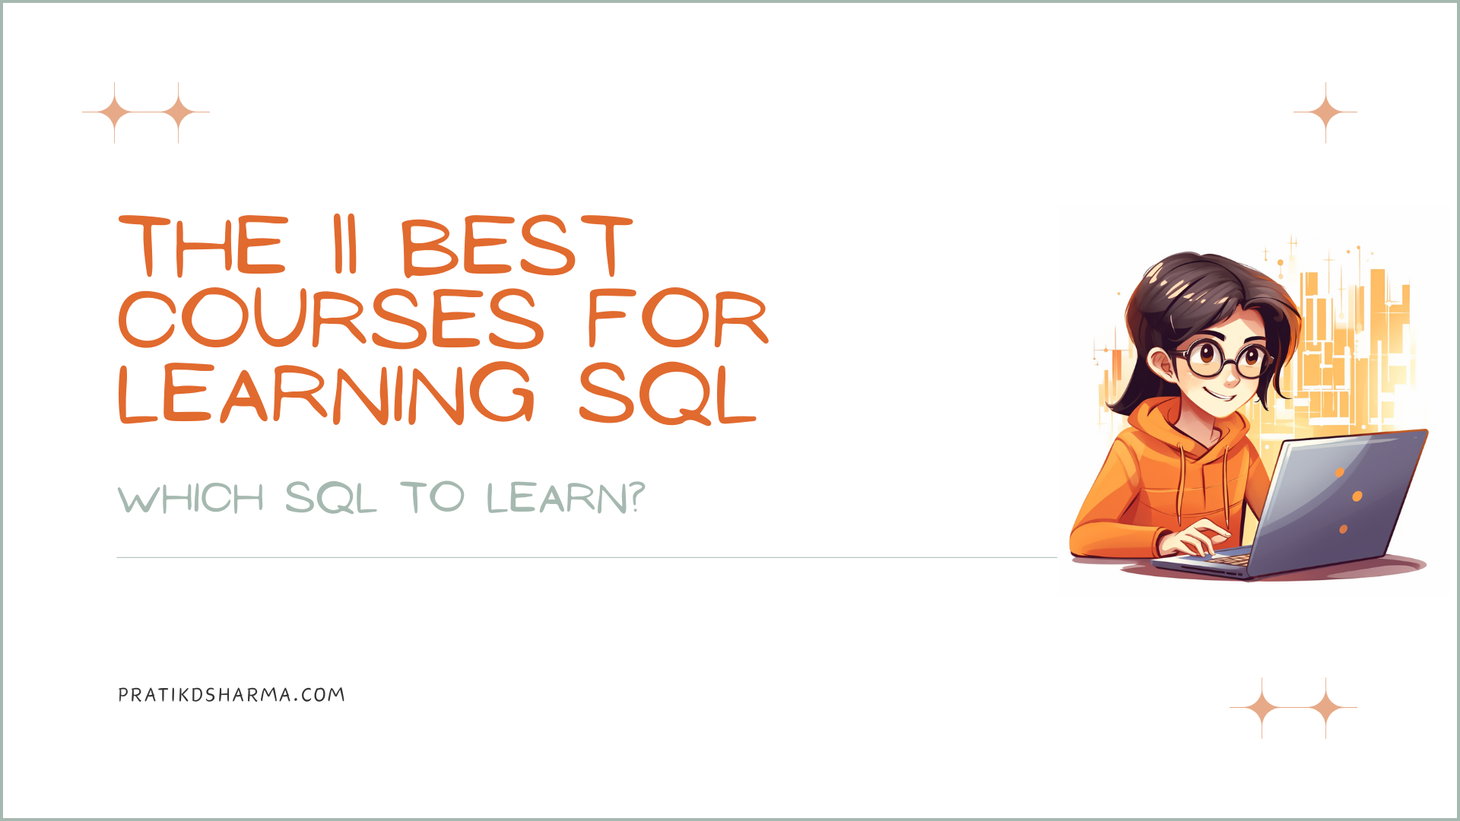 The 11 Best Courses for Learning SQL.